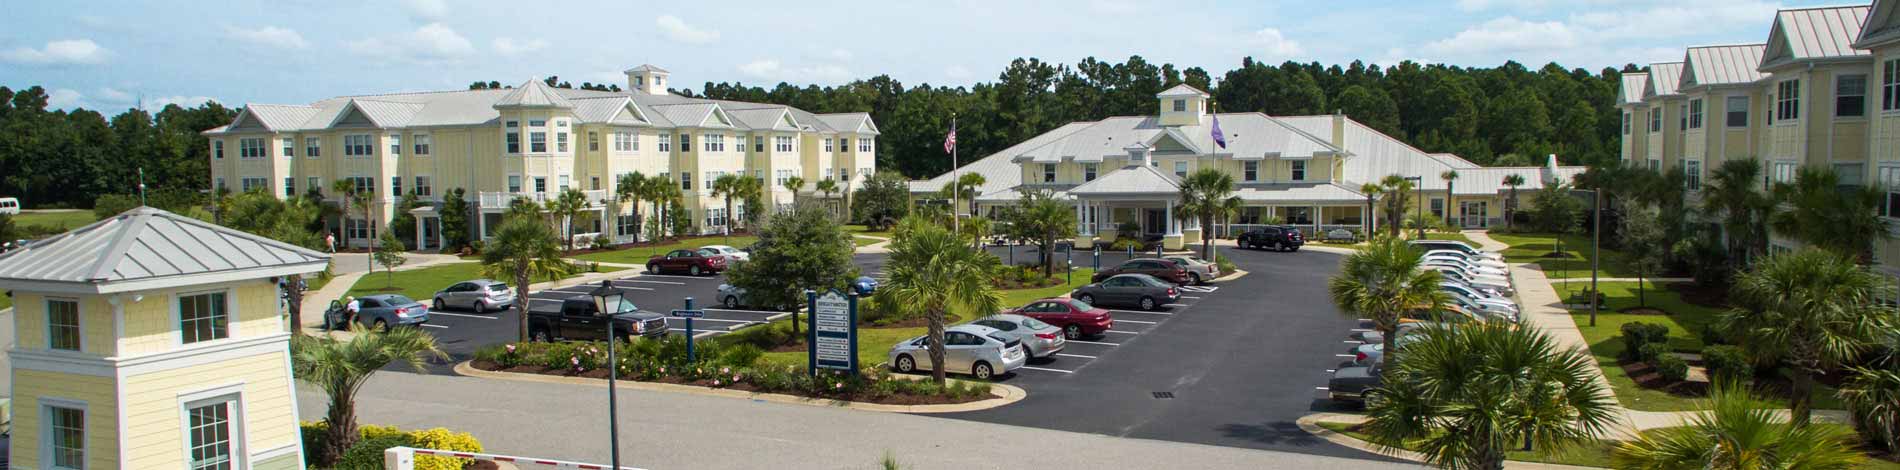 About Brightwater Community in Myrtle Beach, SC